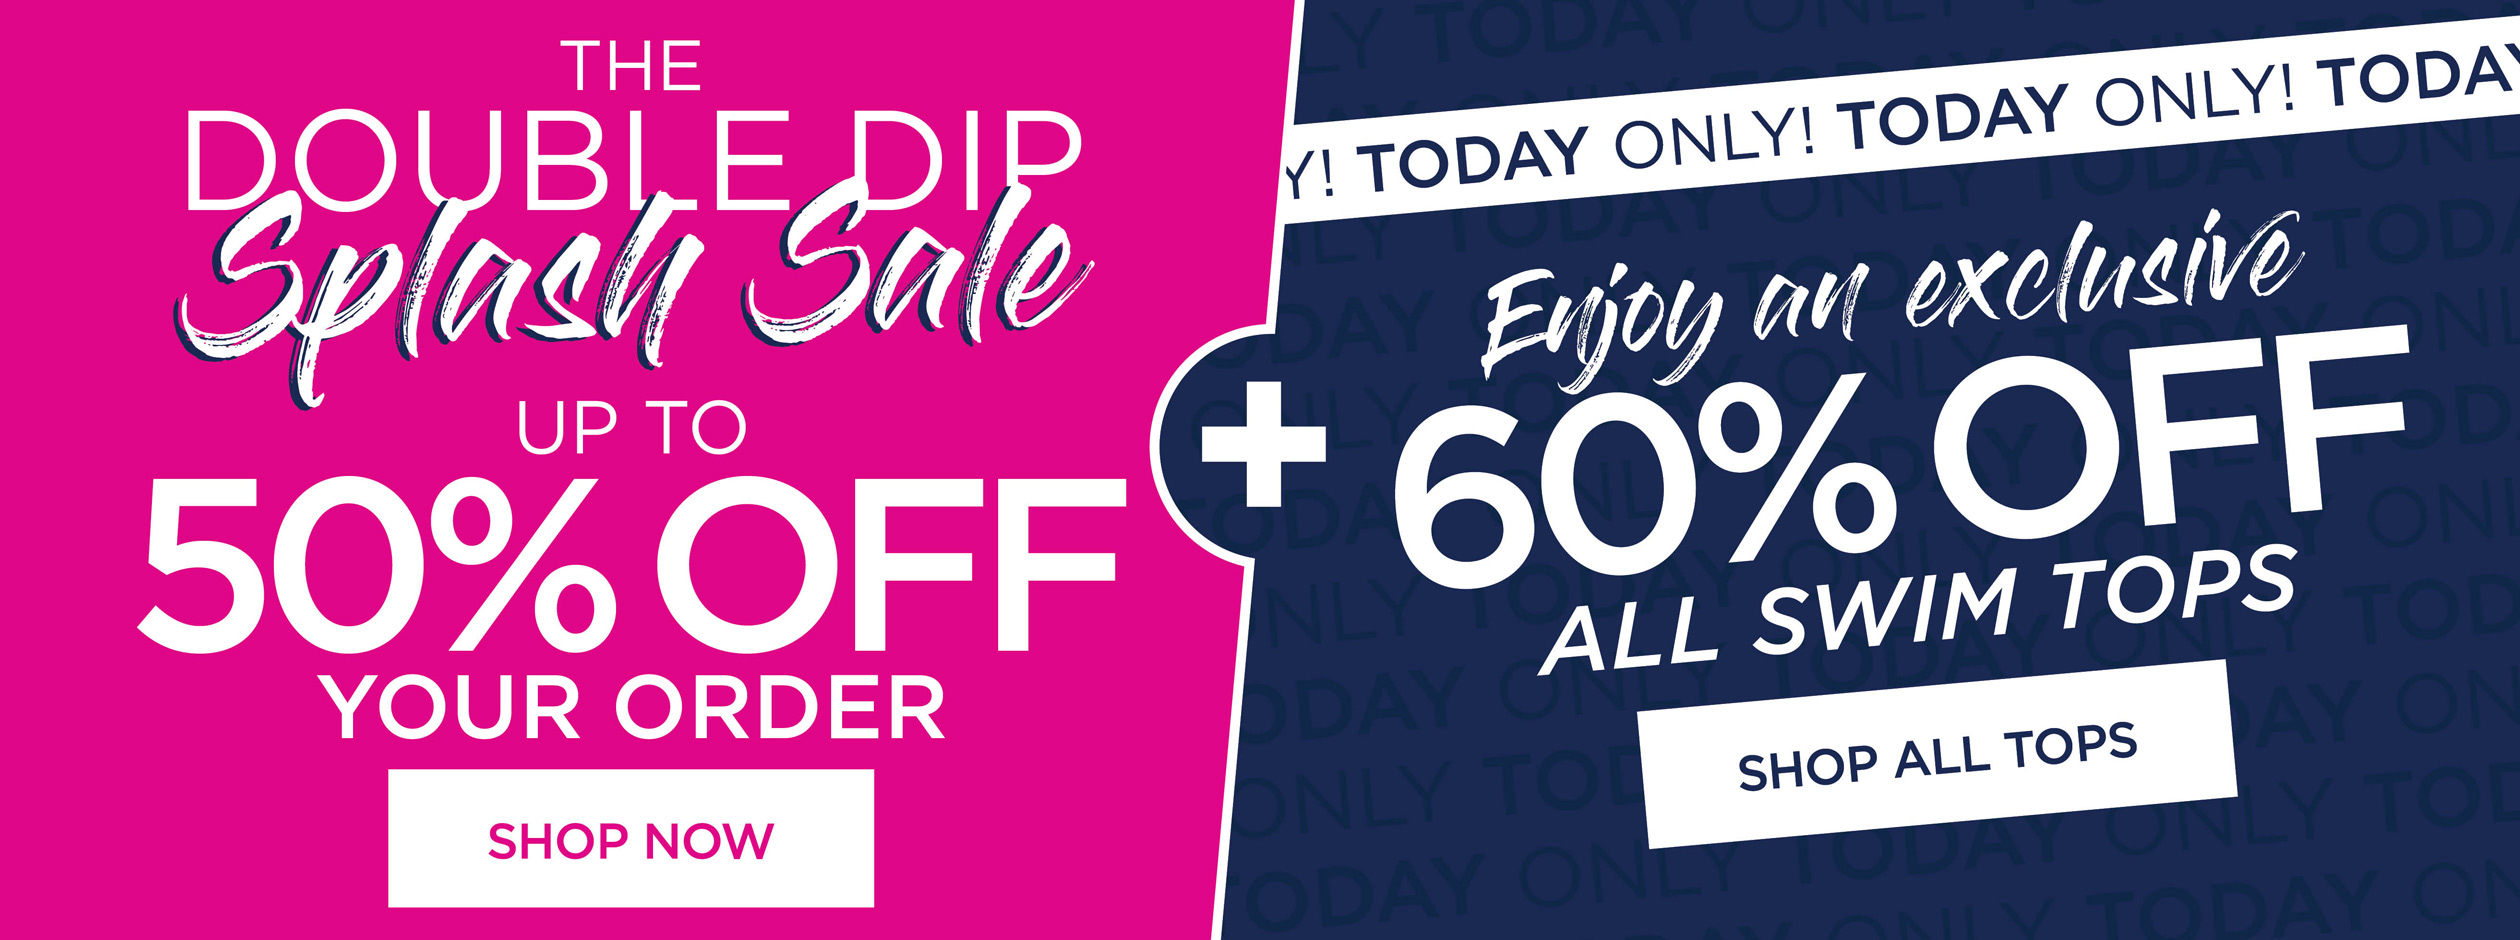 DOUBLE DIP SPLASH SALE UP TO 50% OFF YOUR ORDER. SHOP NOW